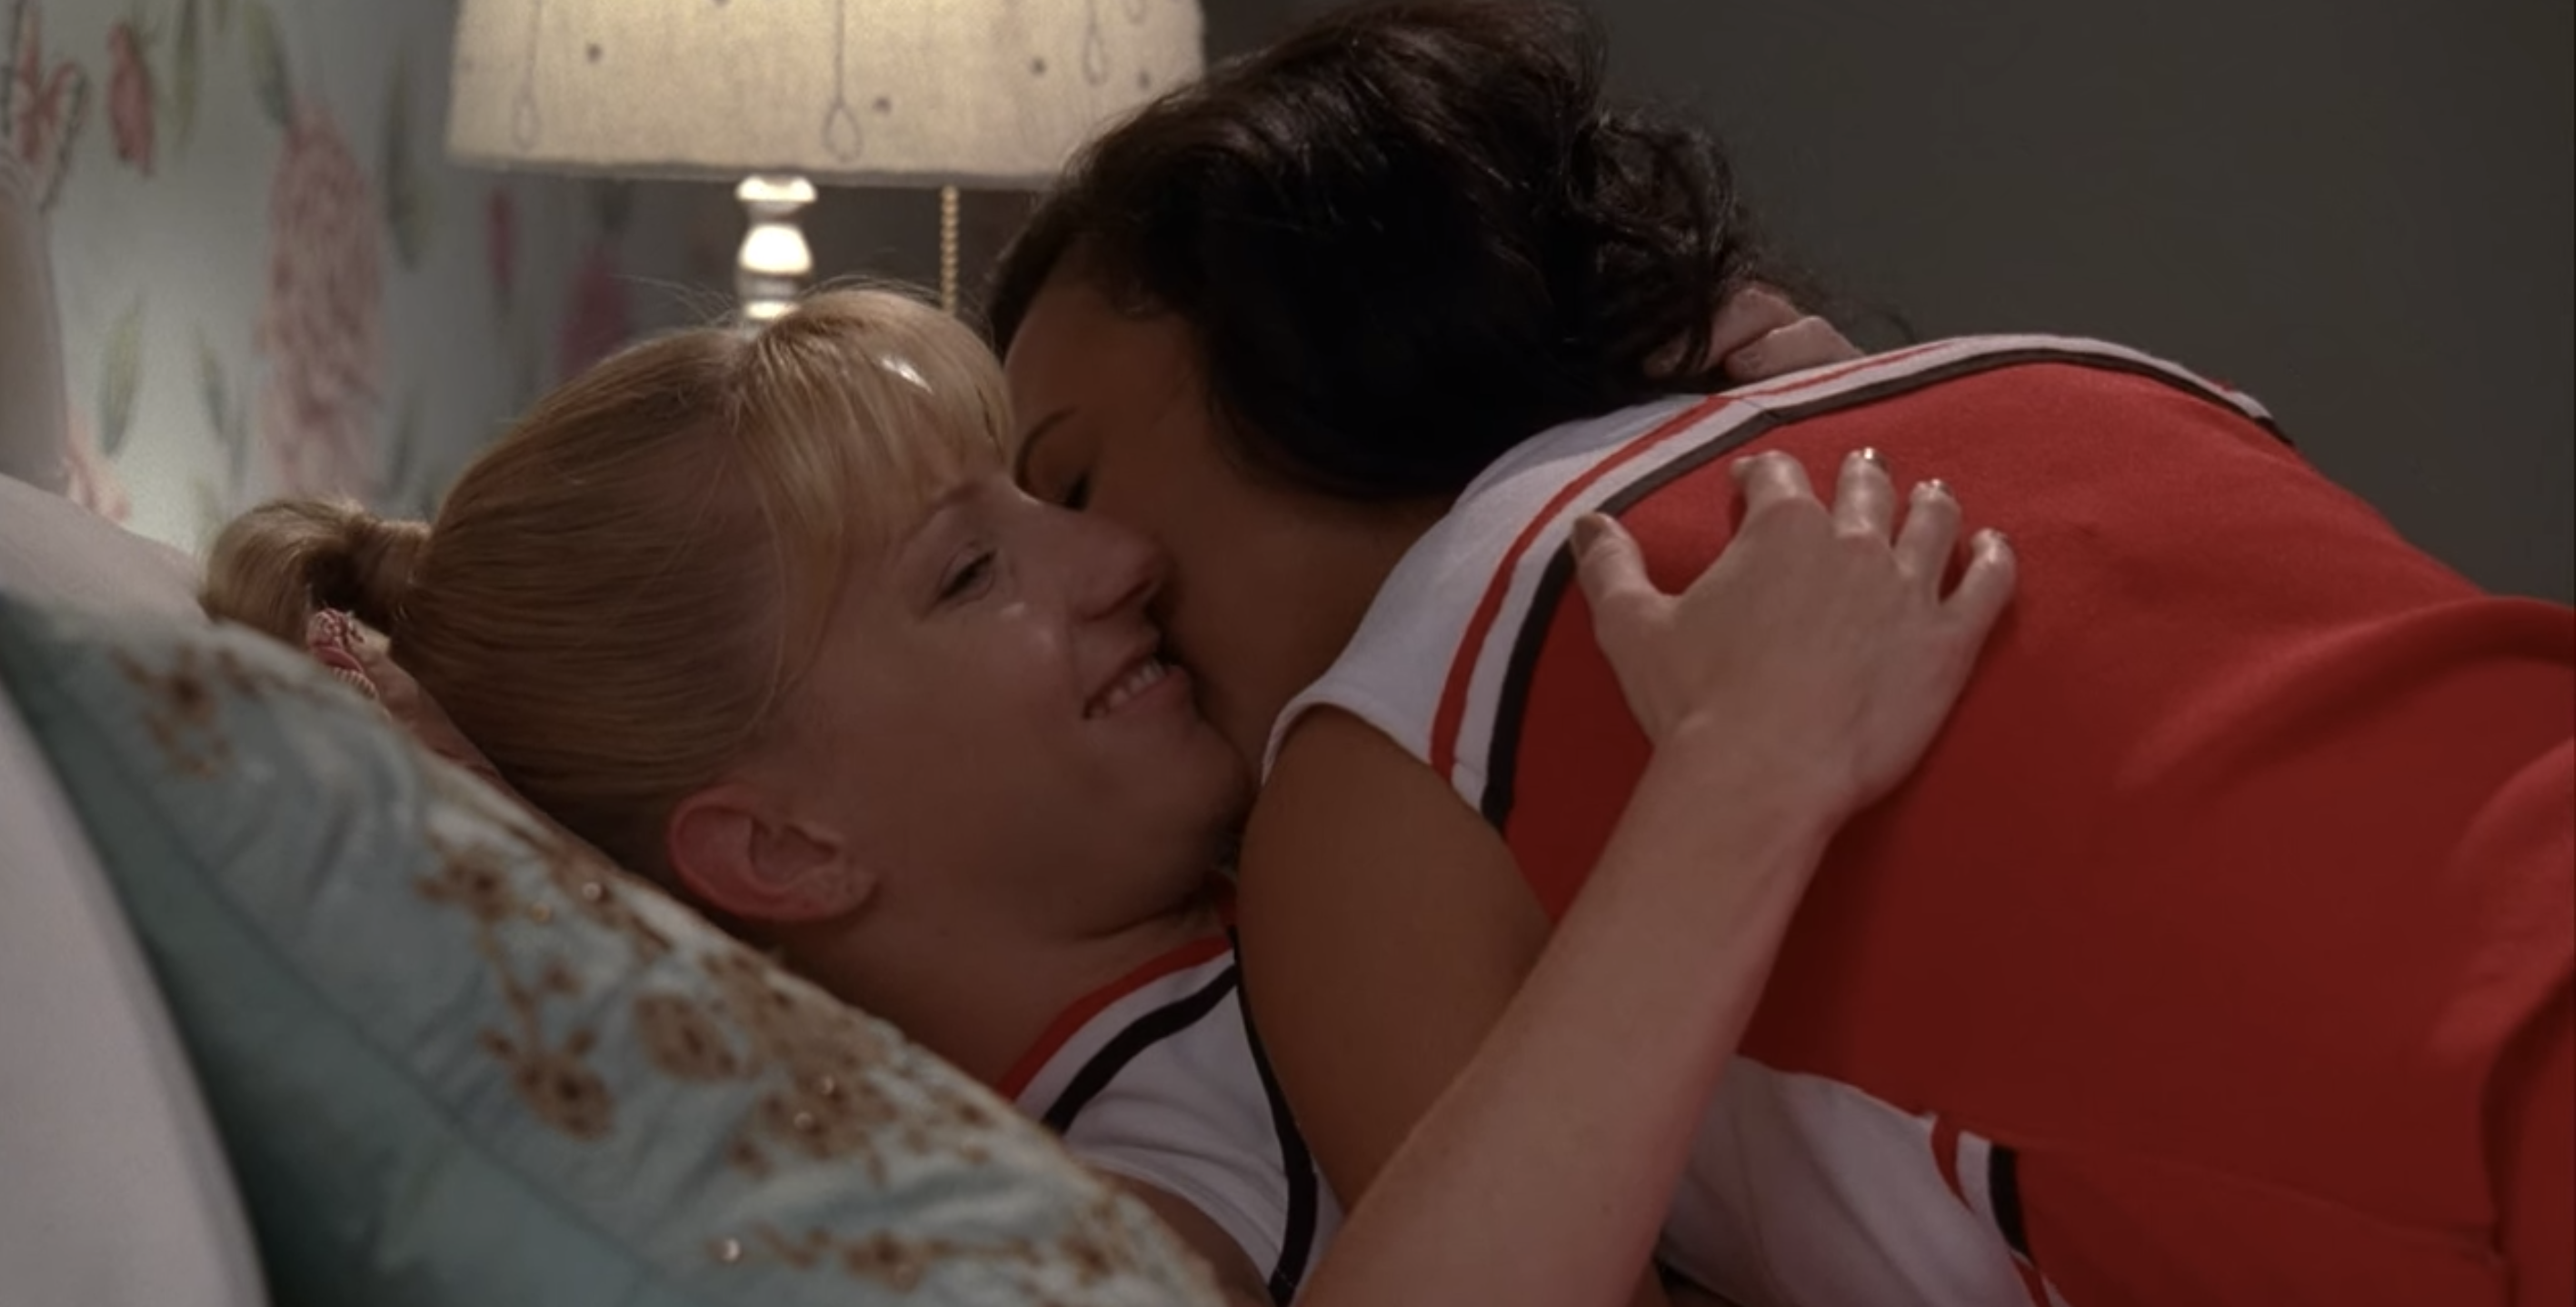 Brittany and Santana making out in bed